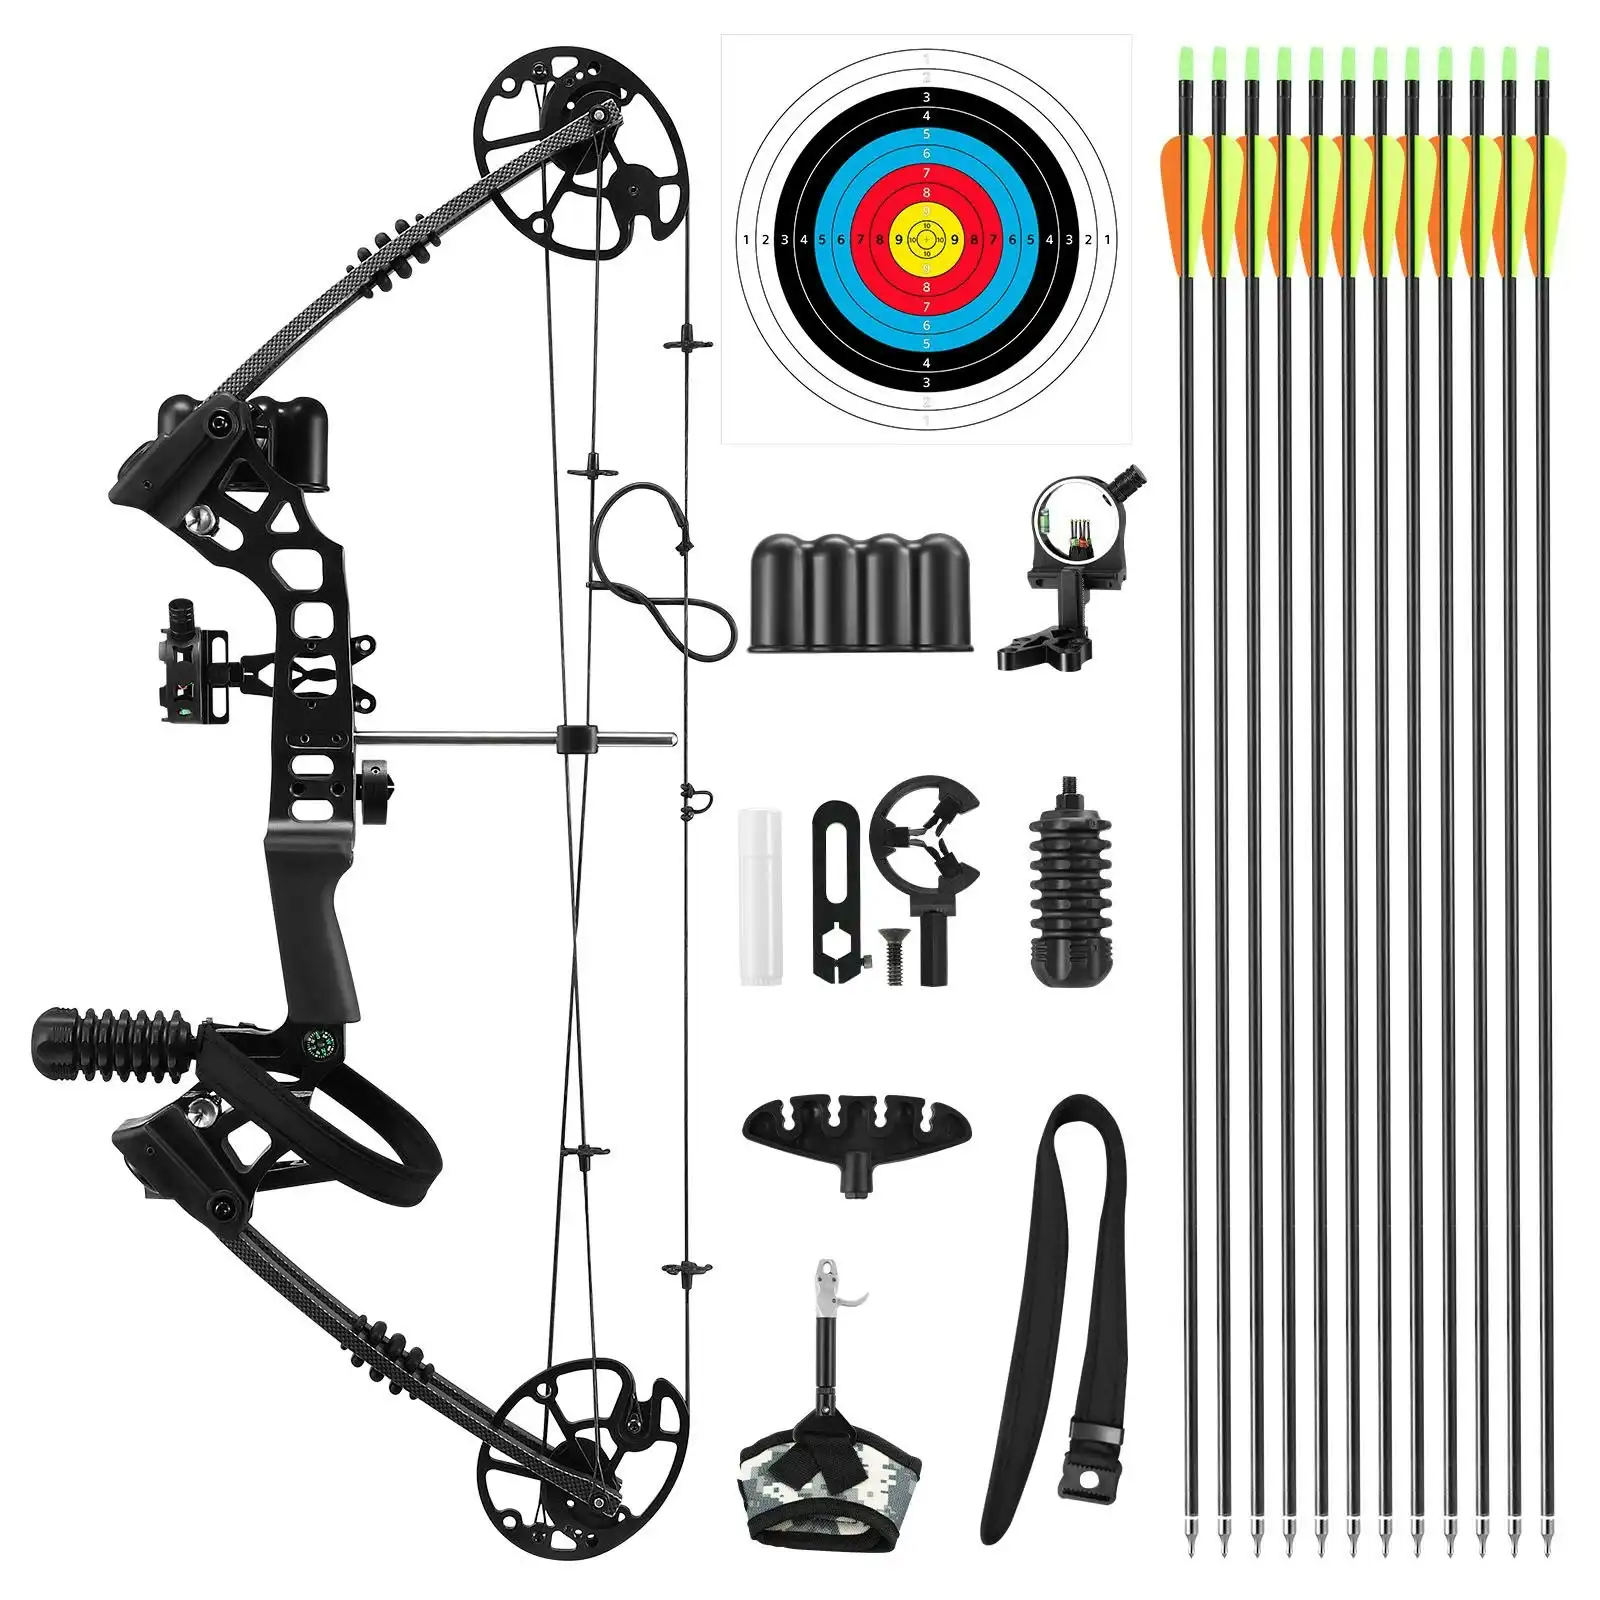 Ausway Compound Bow Arrow Set Sports Archery Hunting Target Shooting 20-70lbs Right Handed Adjustable for Beginners Masters Black